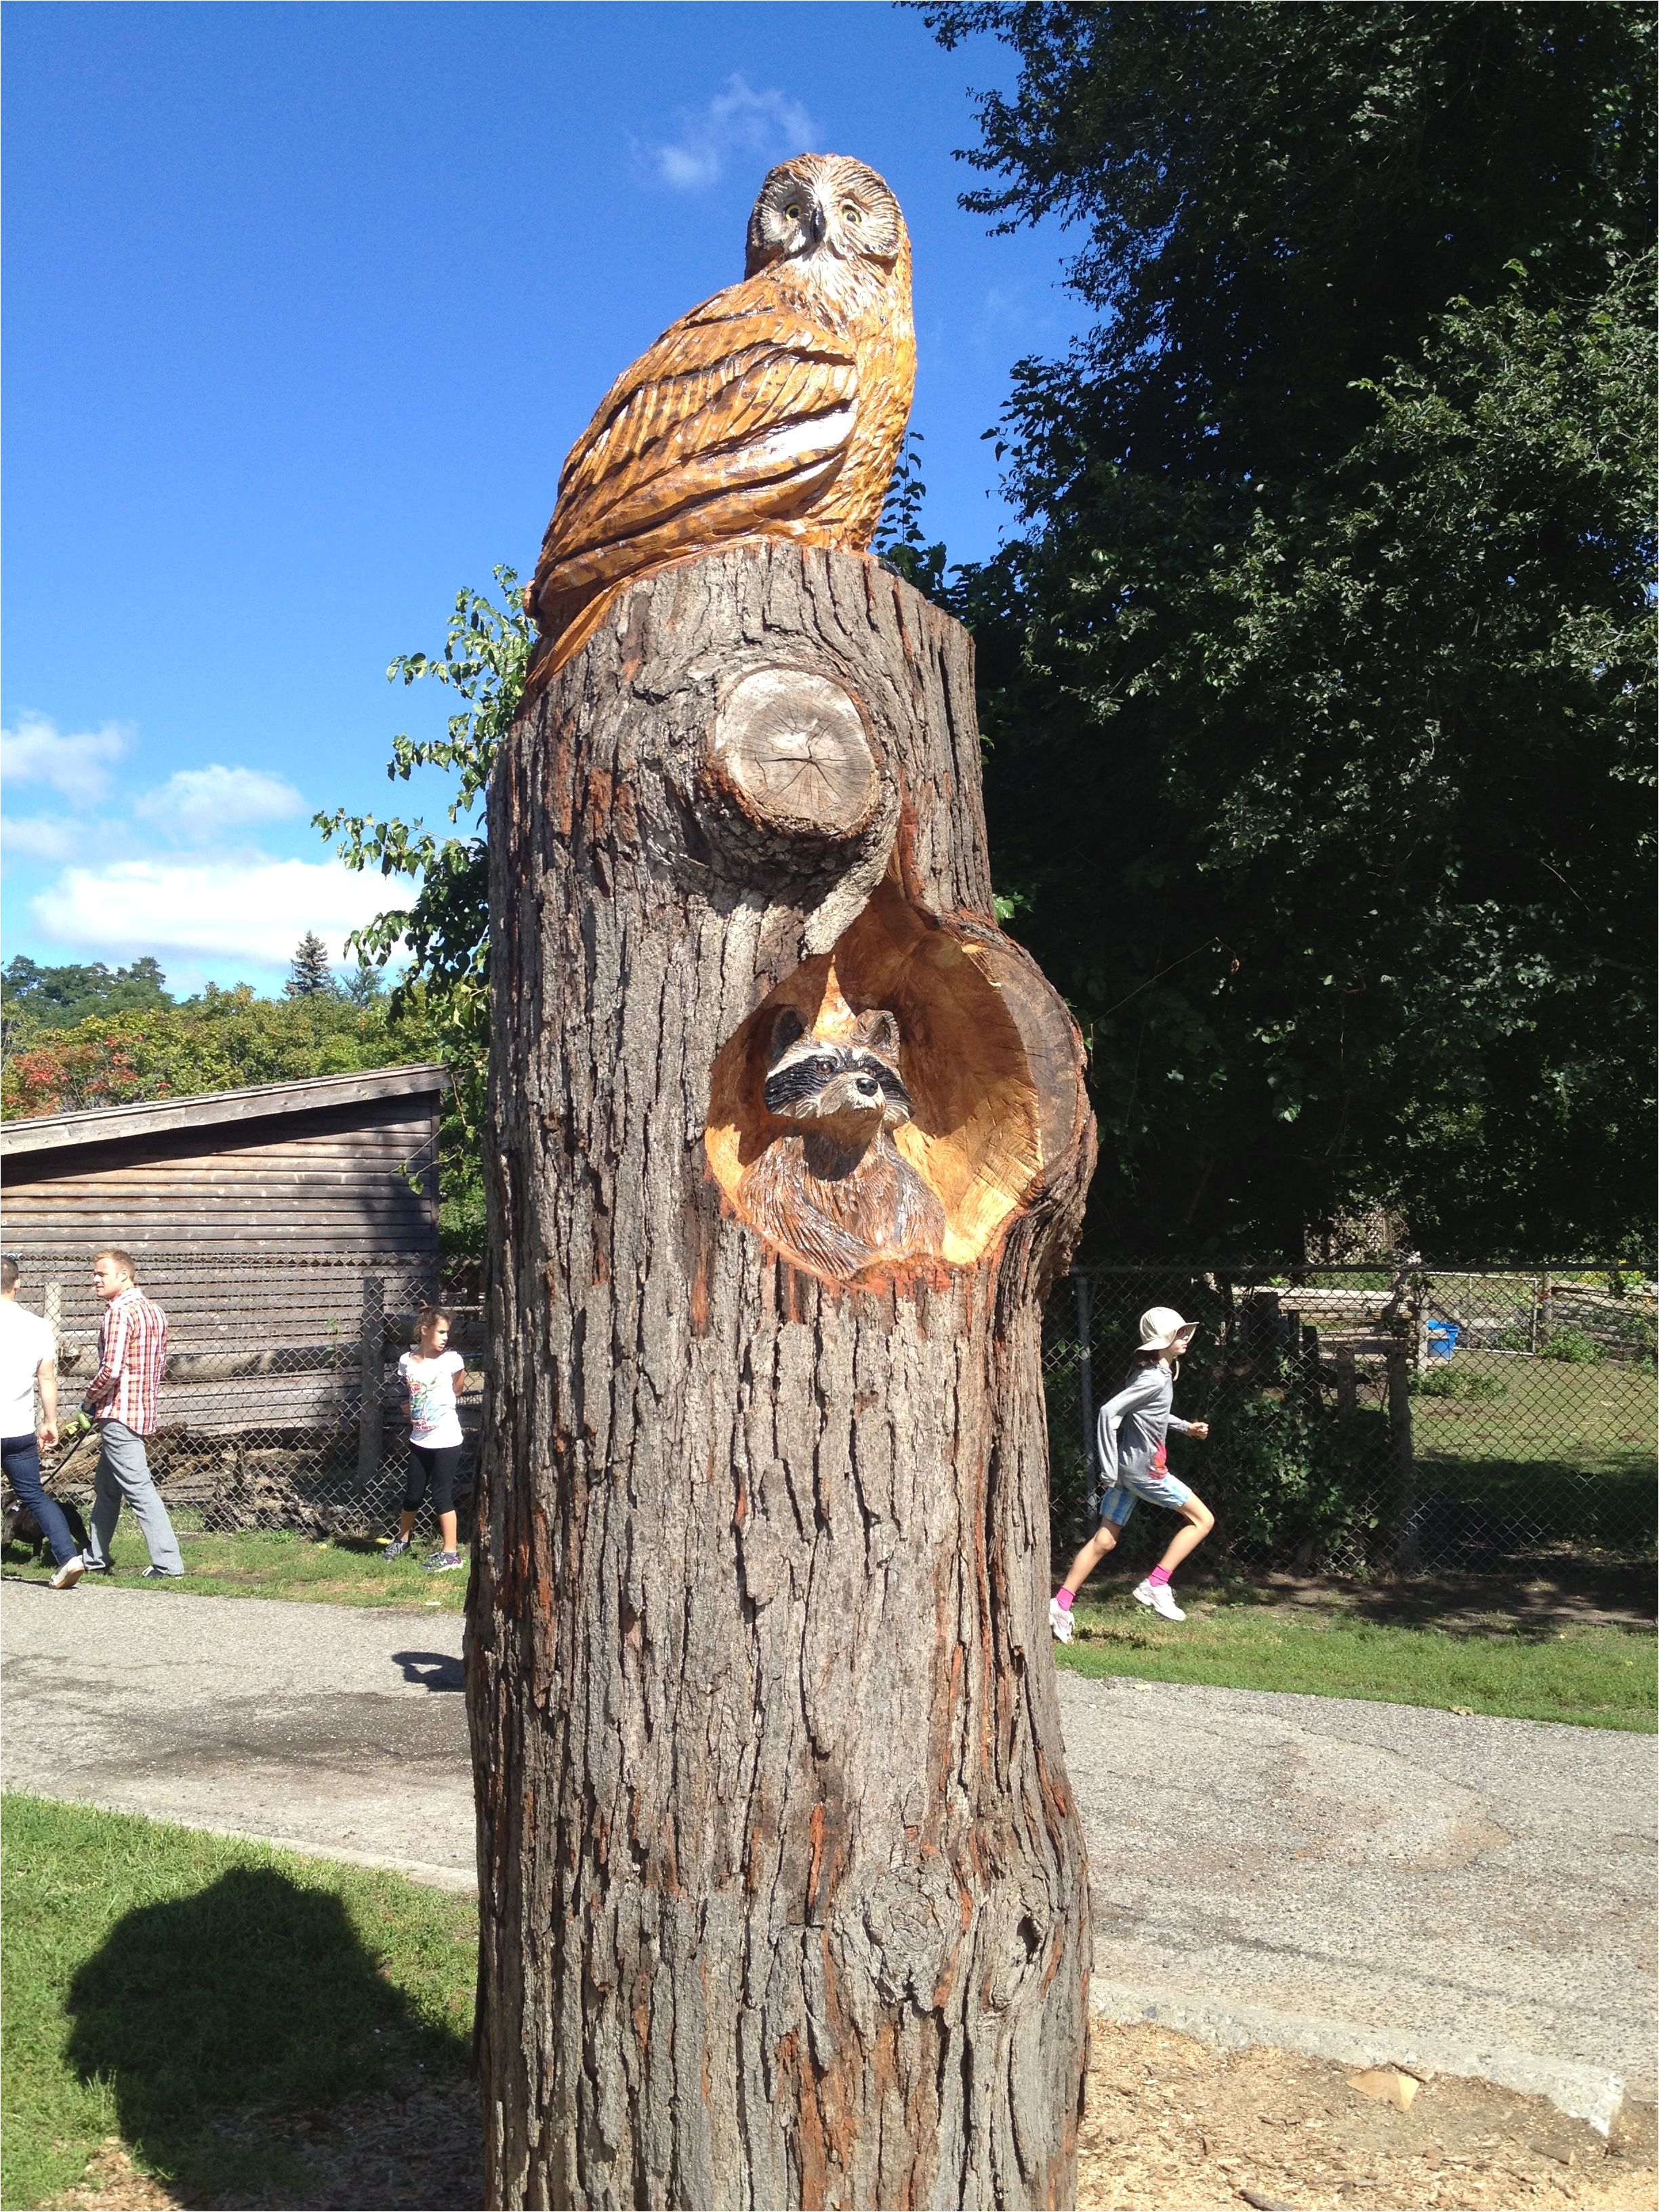 turning a tree stump in cabbagetown into art